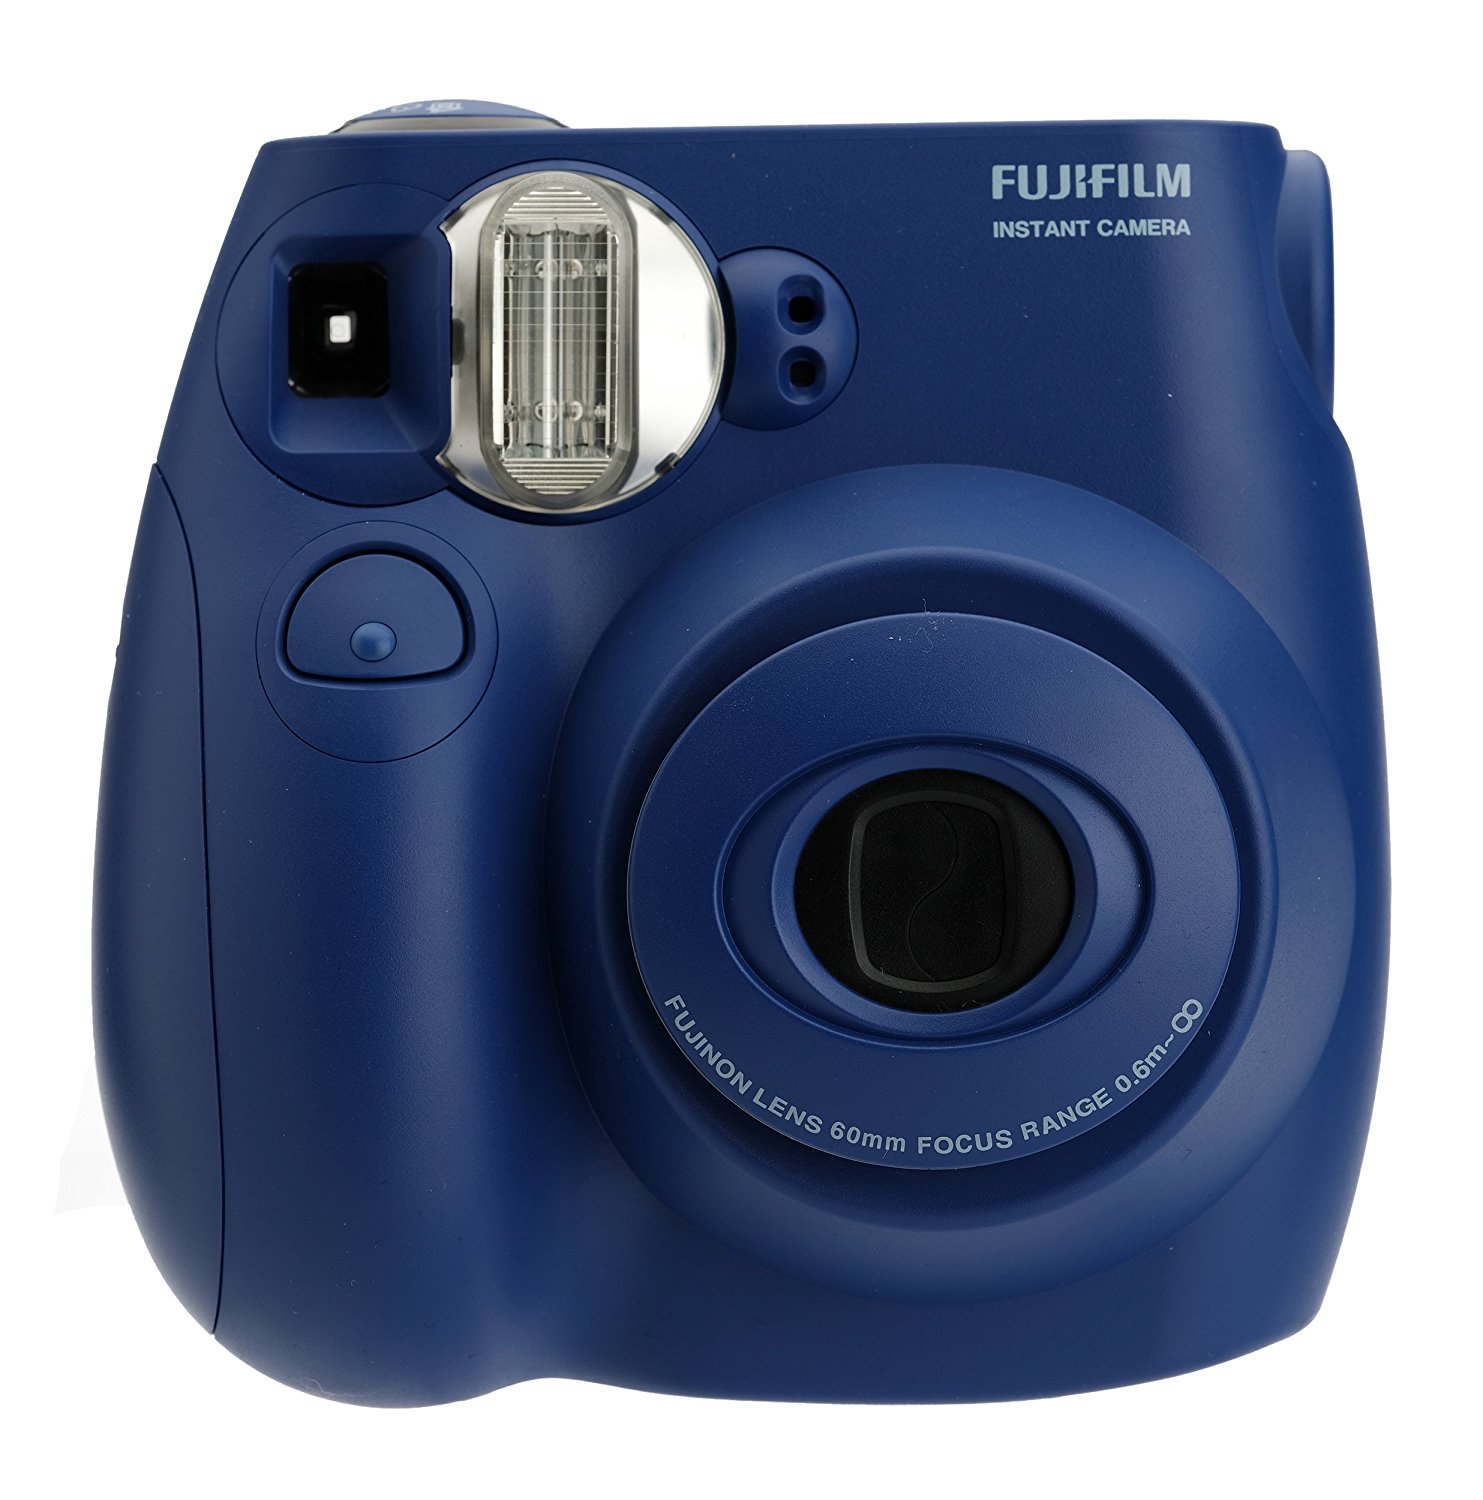 Today only: Fujifilm Instax Mini 7s instant film camera for $40